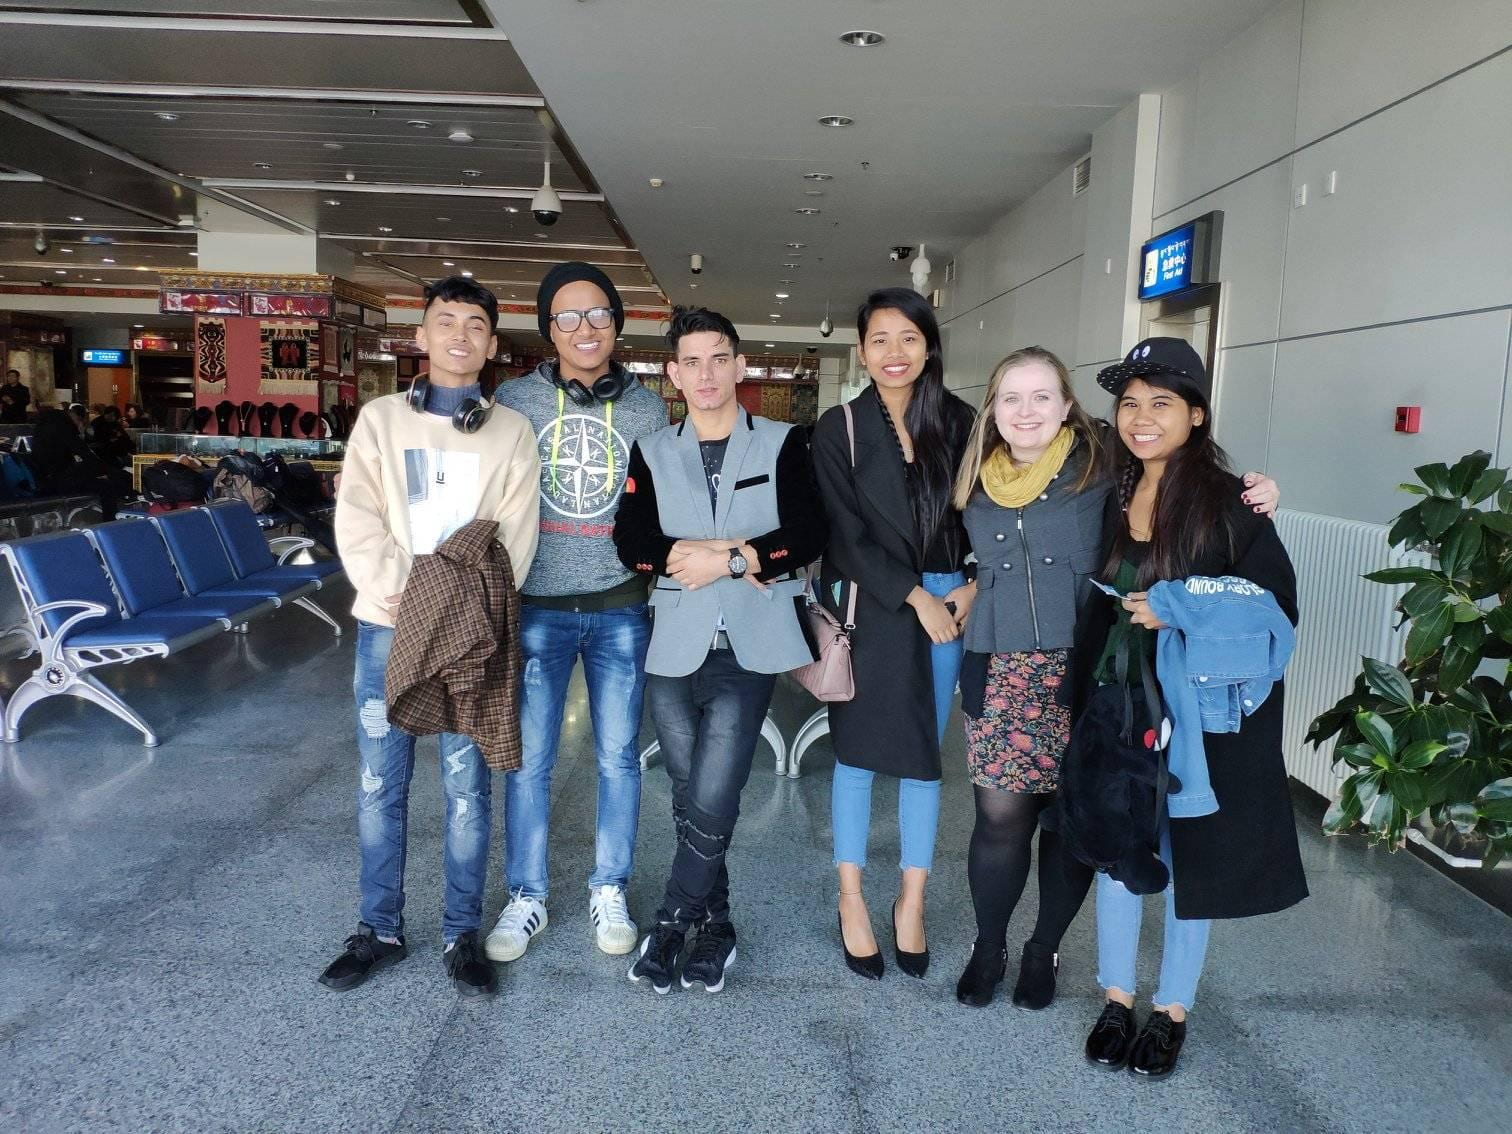 Sagar (pictured right) and Emily Hall's new Nepali friends in the airport in Lhasa, Tibet (after eating the chips)